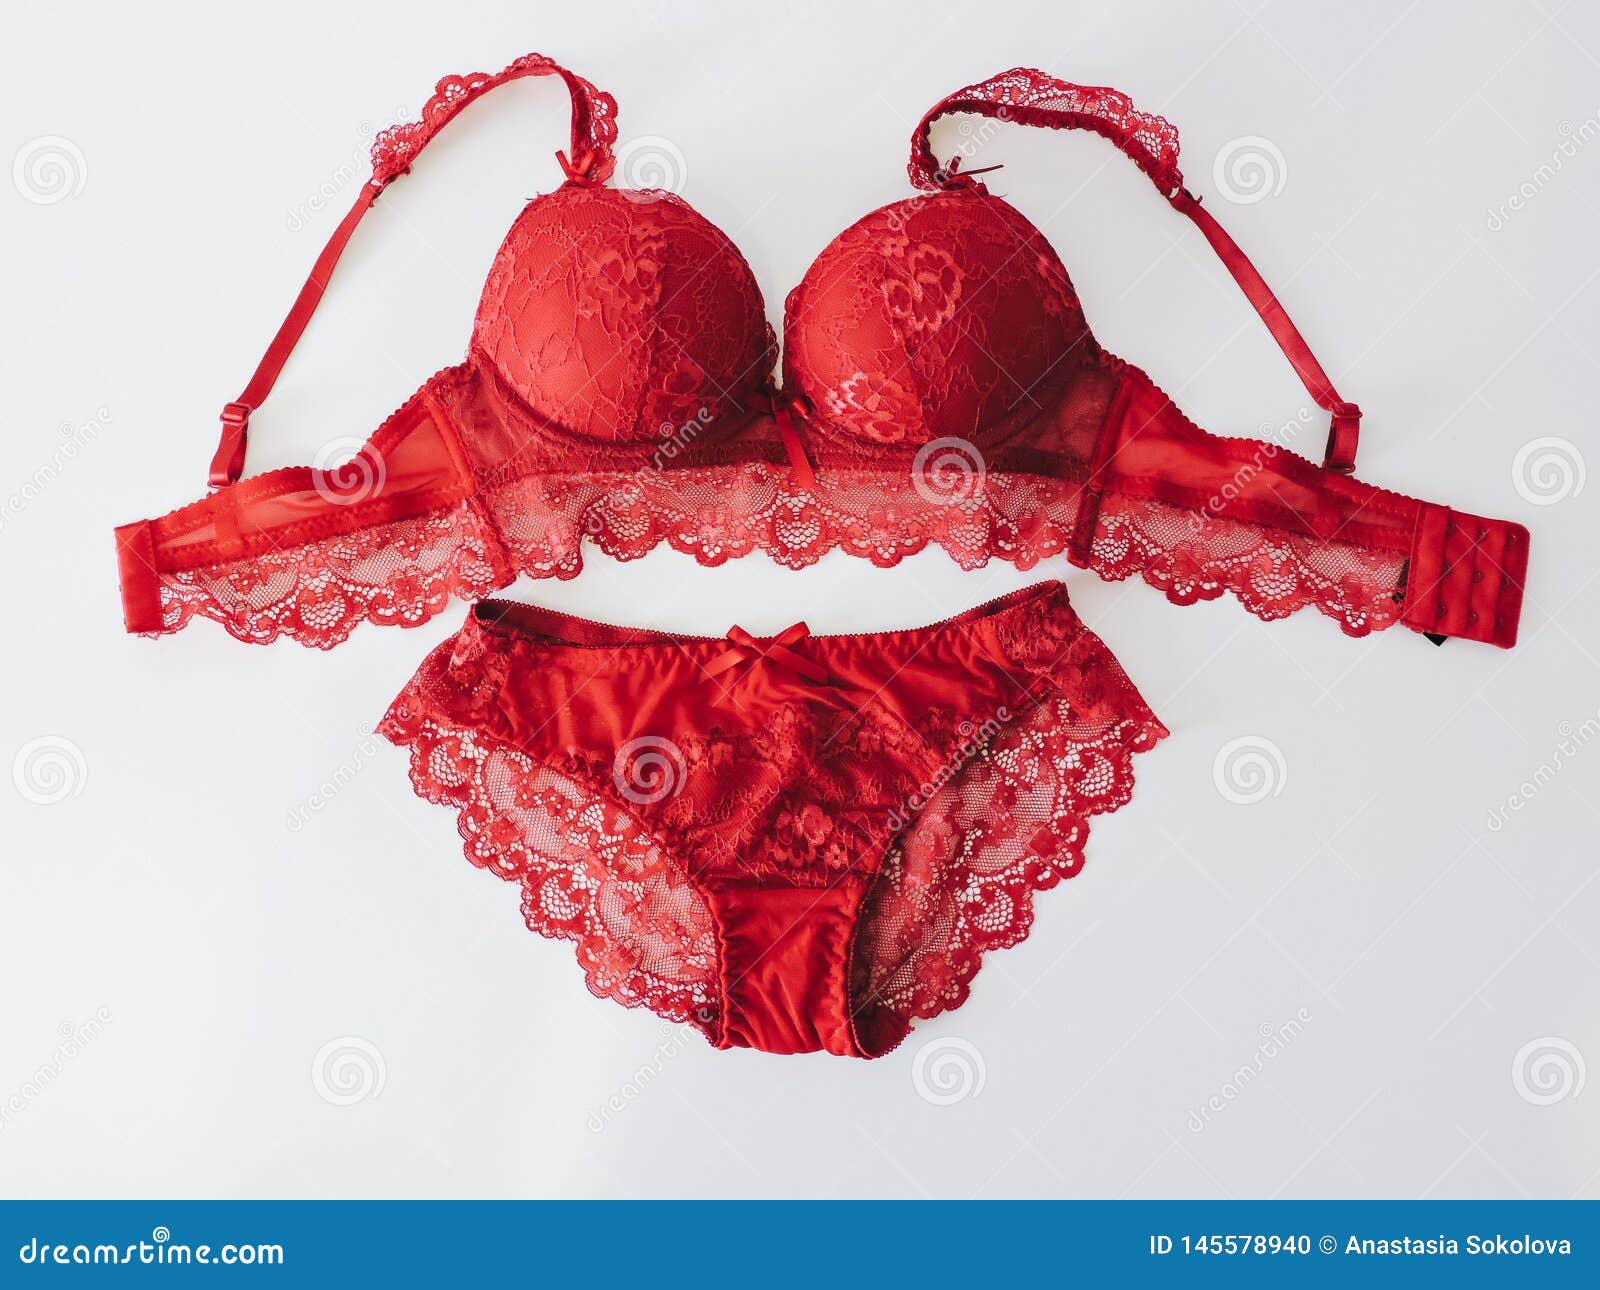 https://thumbs.dreamstime.com/z/red-women-underwear-lace-isolated-white-background-red-bra-pantie-copy-space-red-women-underwear-lace-isolated-145578940.jpg